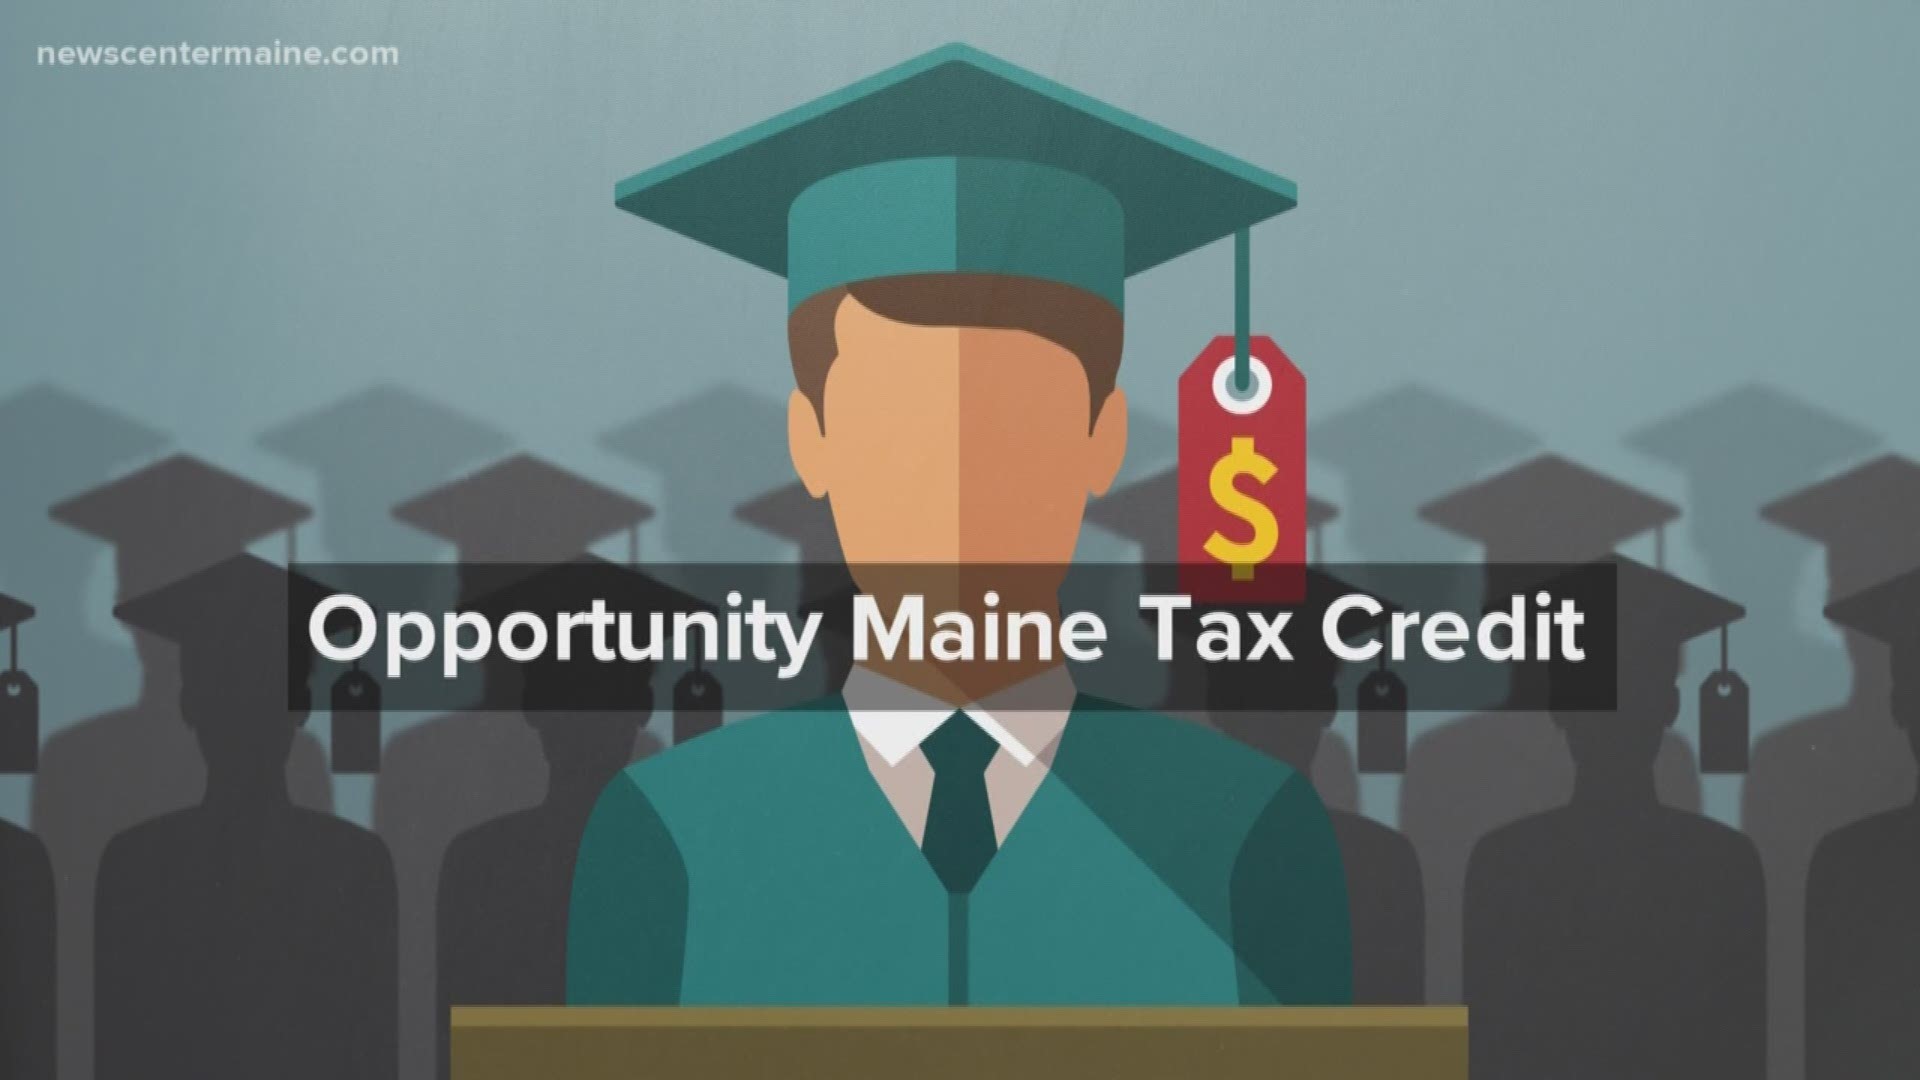 Maine educational tax credit helping businesses attract workers